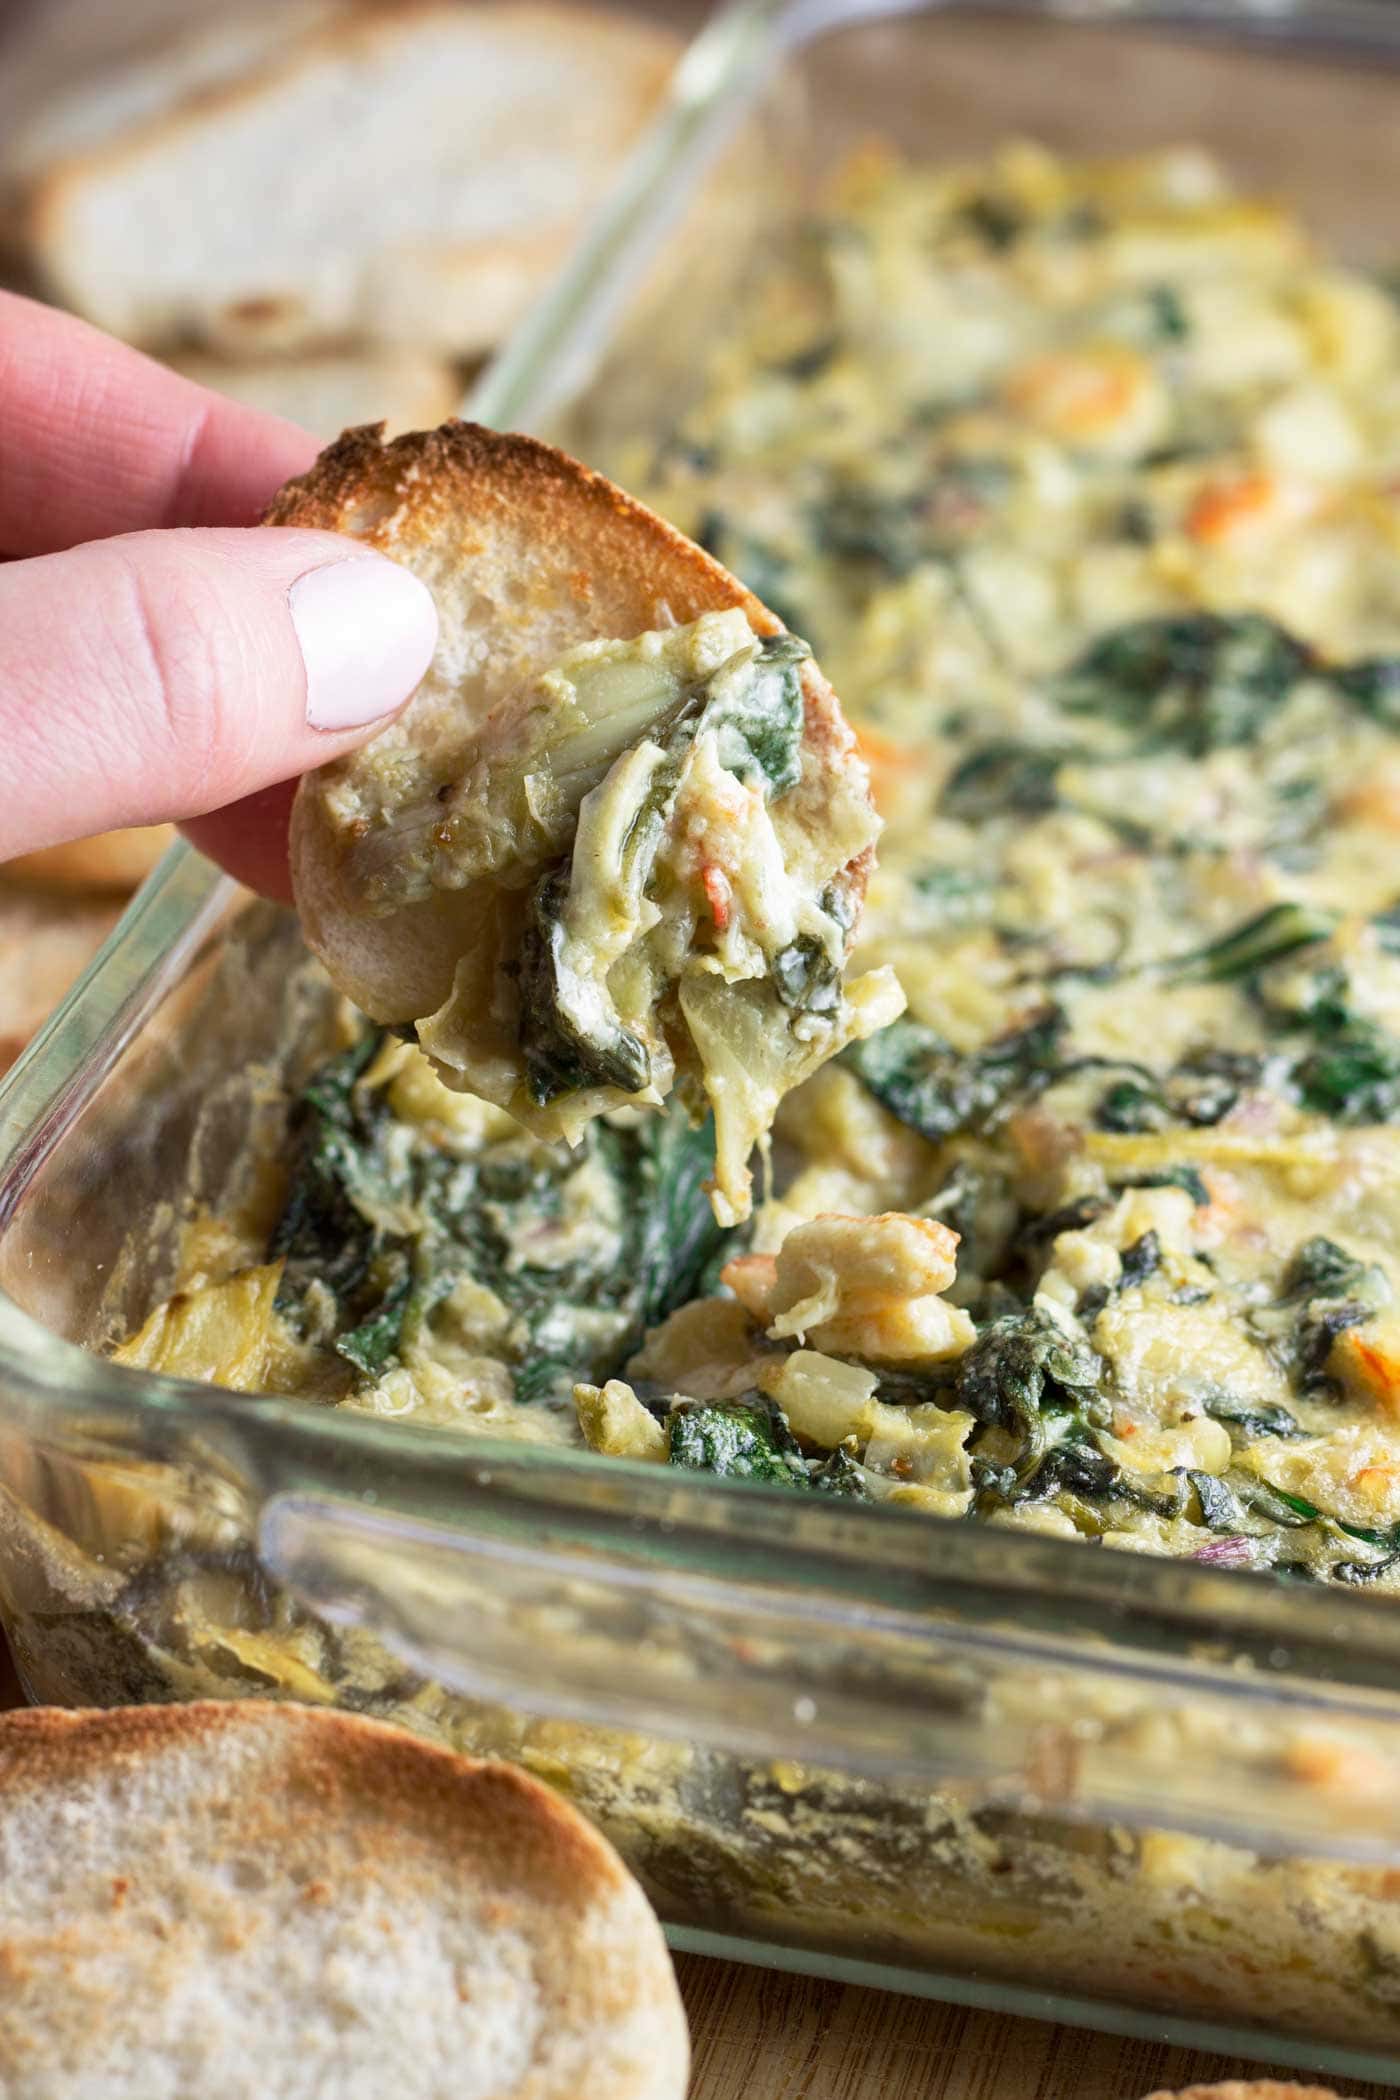 You won’t believe there’s no cheese in this delicious dip! Spinach artichoke dip made dairy free! Plus #shrimp! Y'all are going to love this easy and addictive recipe. With just 10 minutes of prep time it's perfect for #gameday! This simple recipe is #paleo #whole30 #lowcarb #keto #glutenfree and #dairyfree! #spinachartichokedip #paleoappetizer #whole30appetizer #gamedayrecipes #whole30recipes #healthyeating #artichokes #spinach #glutenfreeappetizer #Whole30gameday #paleogameday #healthypartyfood #dairyfreedip 